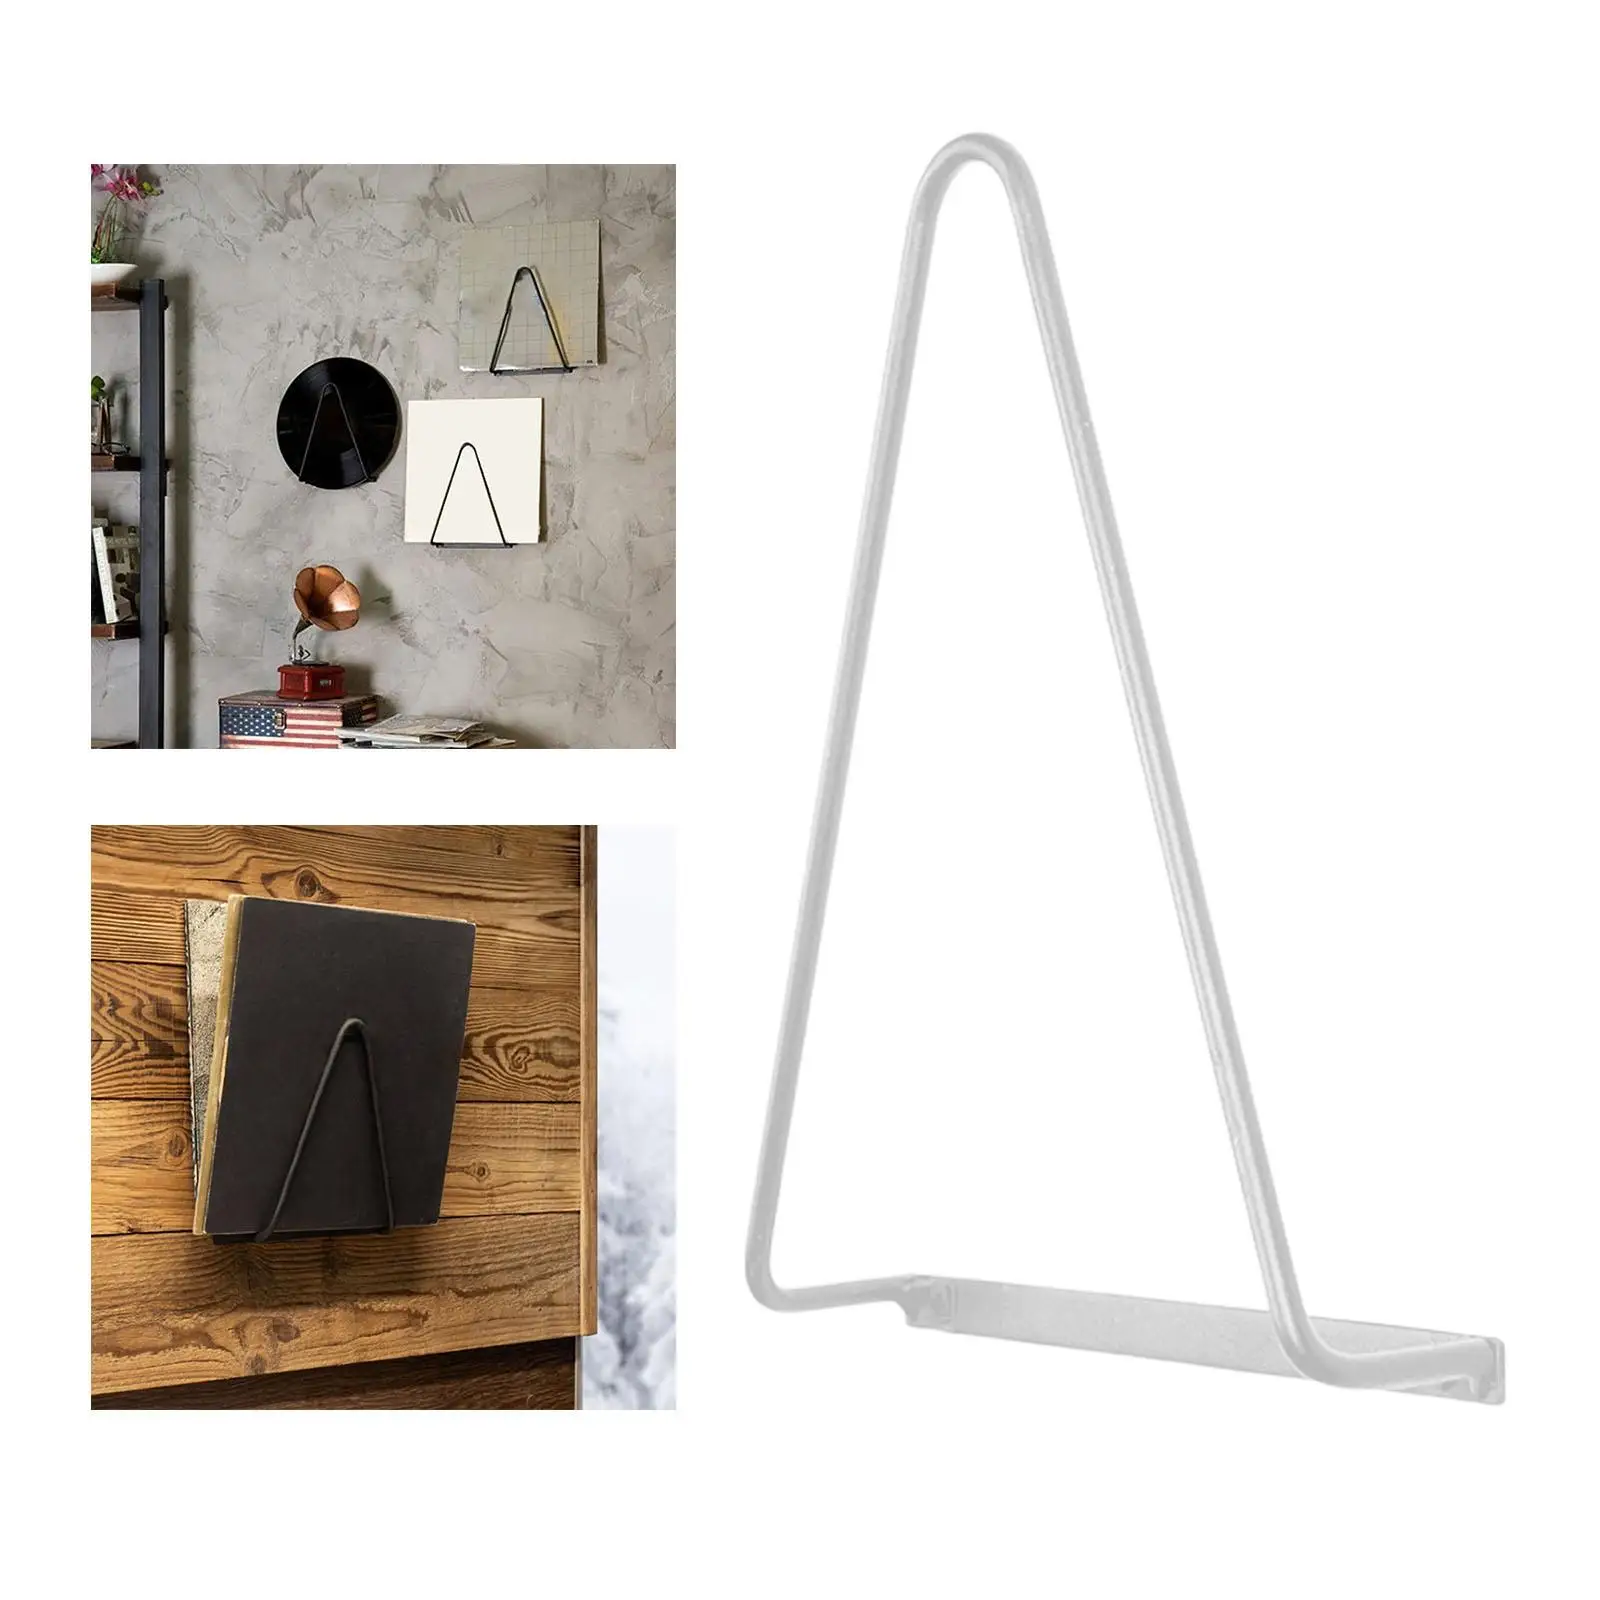 Creative Metal Triangle Wall Mounted Records Storage Rack for Documents, s, Books, Records, Newspapers